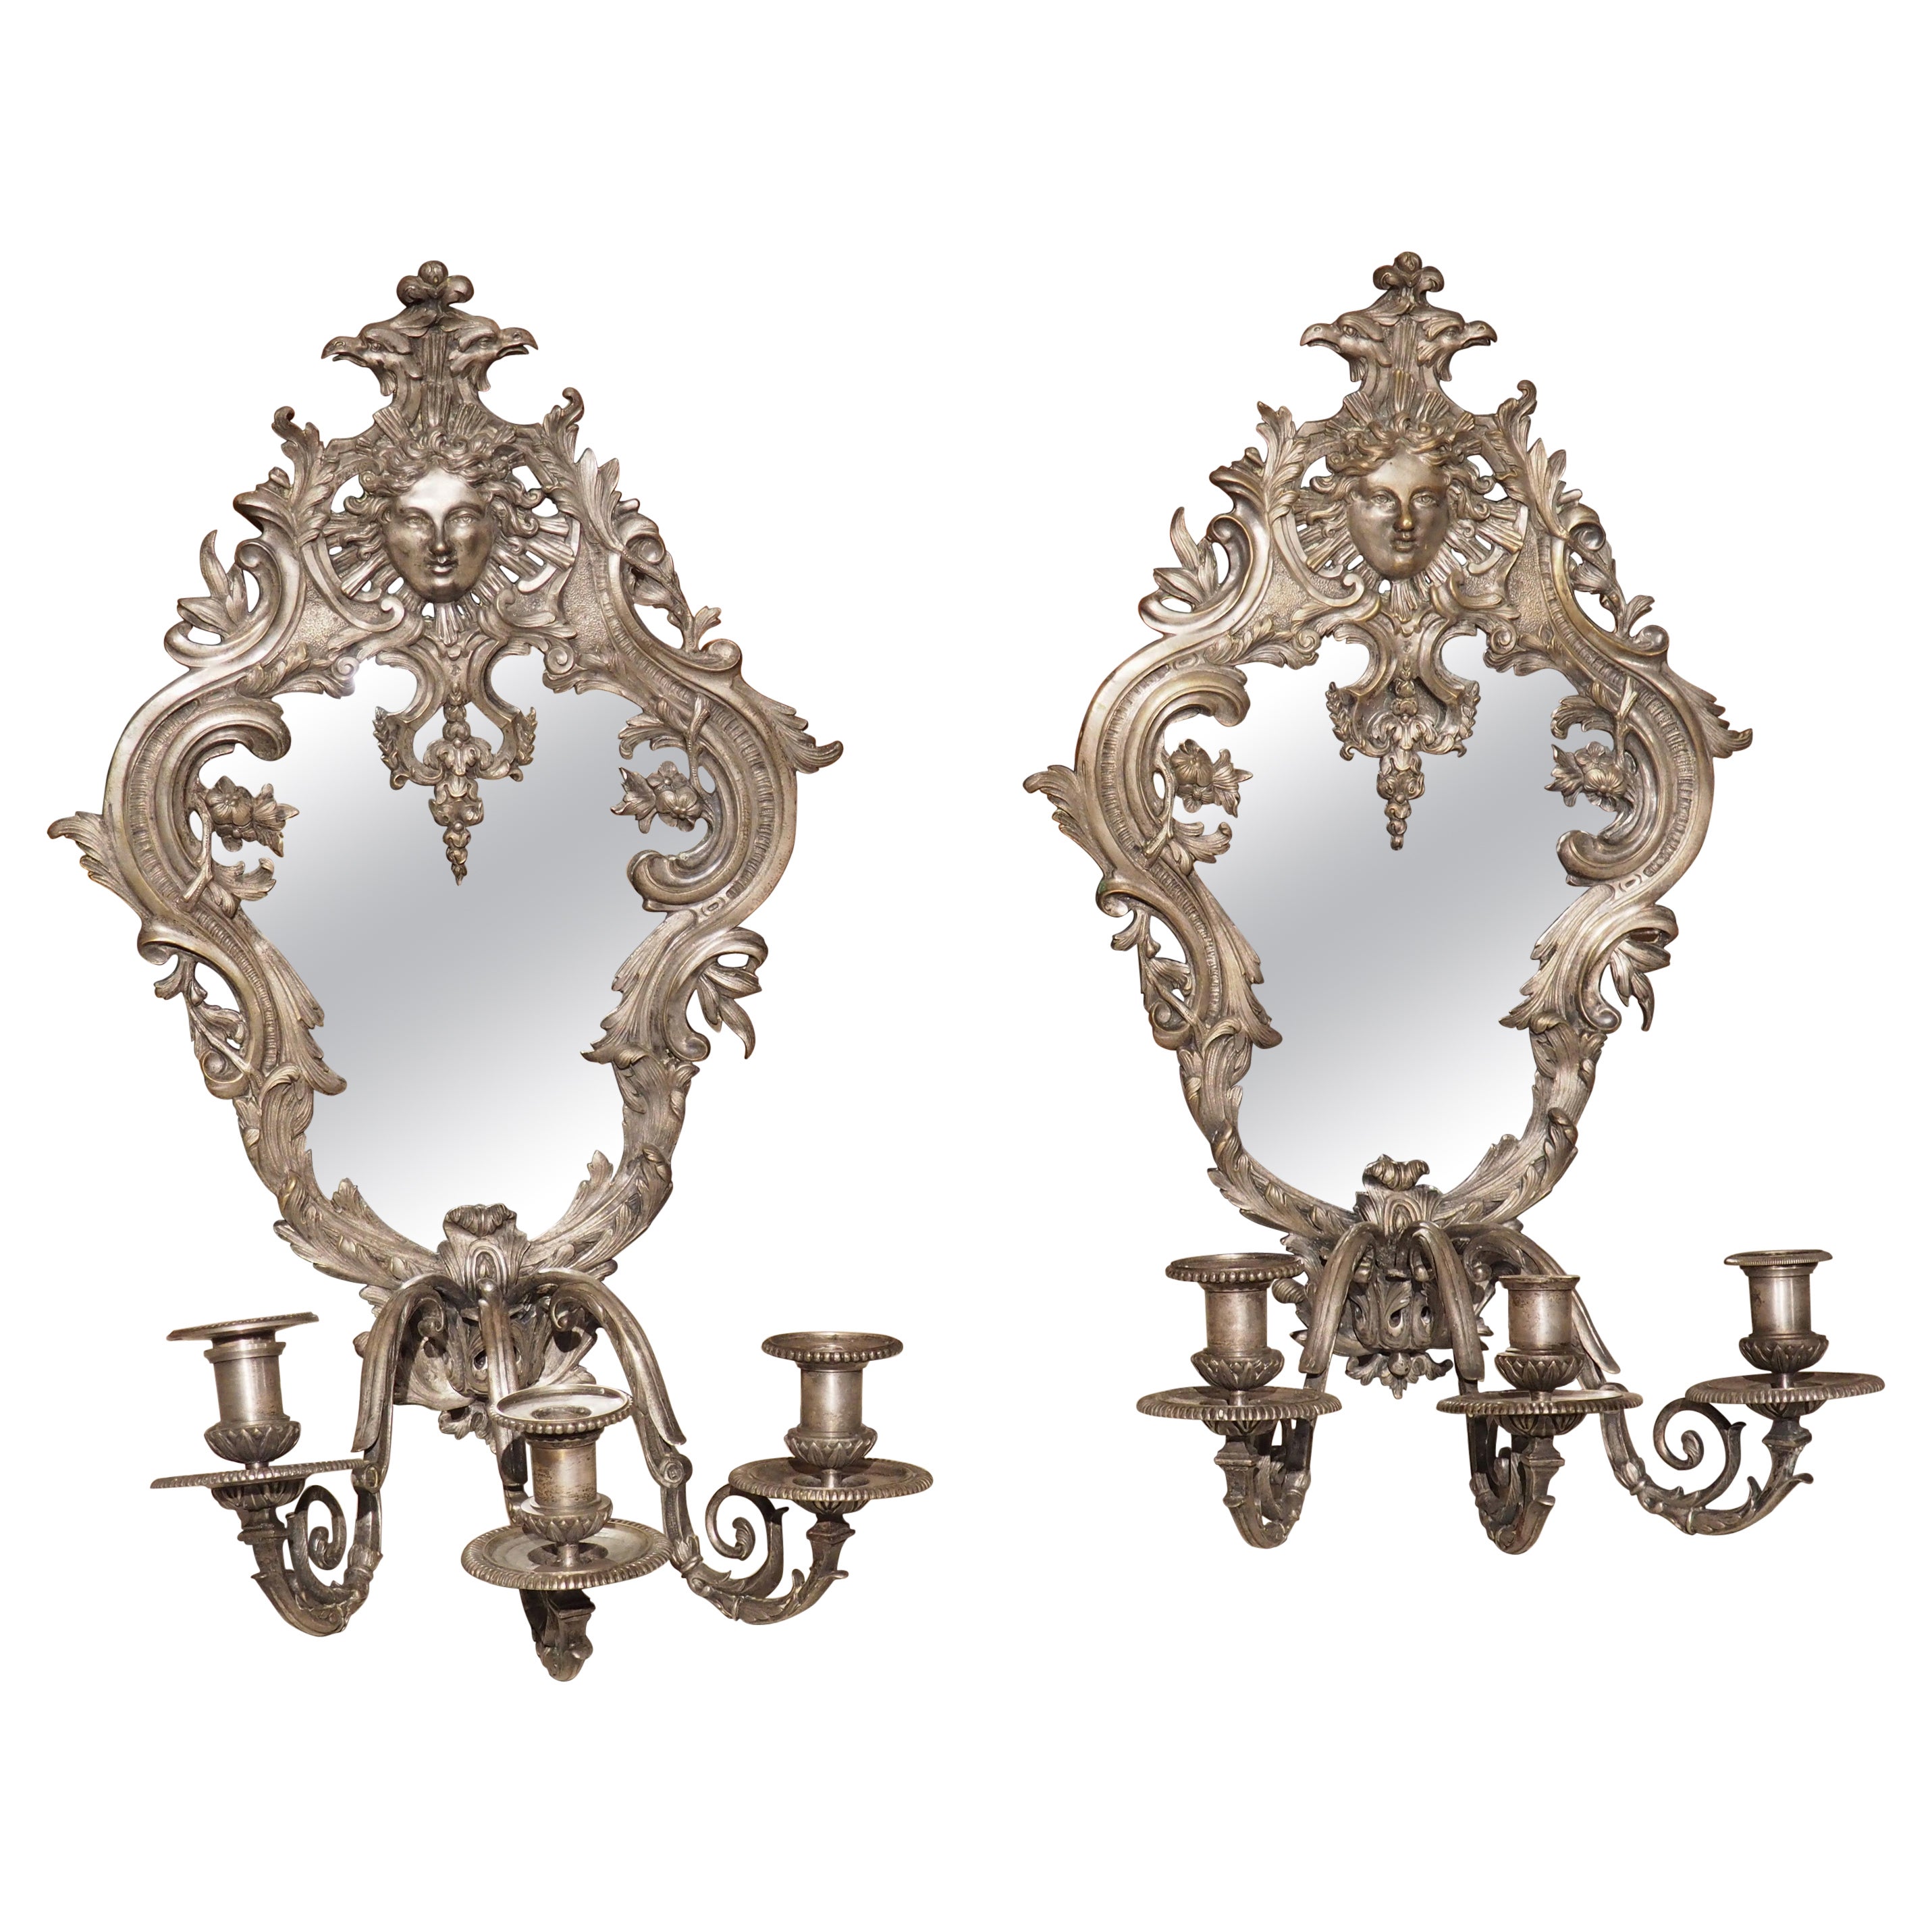 Pair of circa 1850 Régence Style Silvered Bronze Mirrored Sconces from France